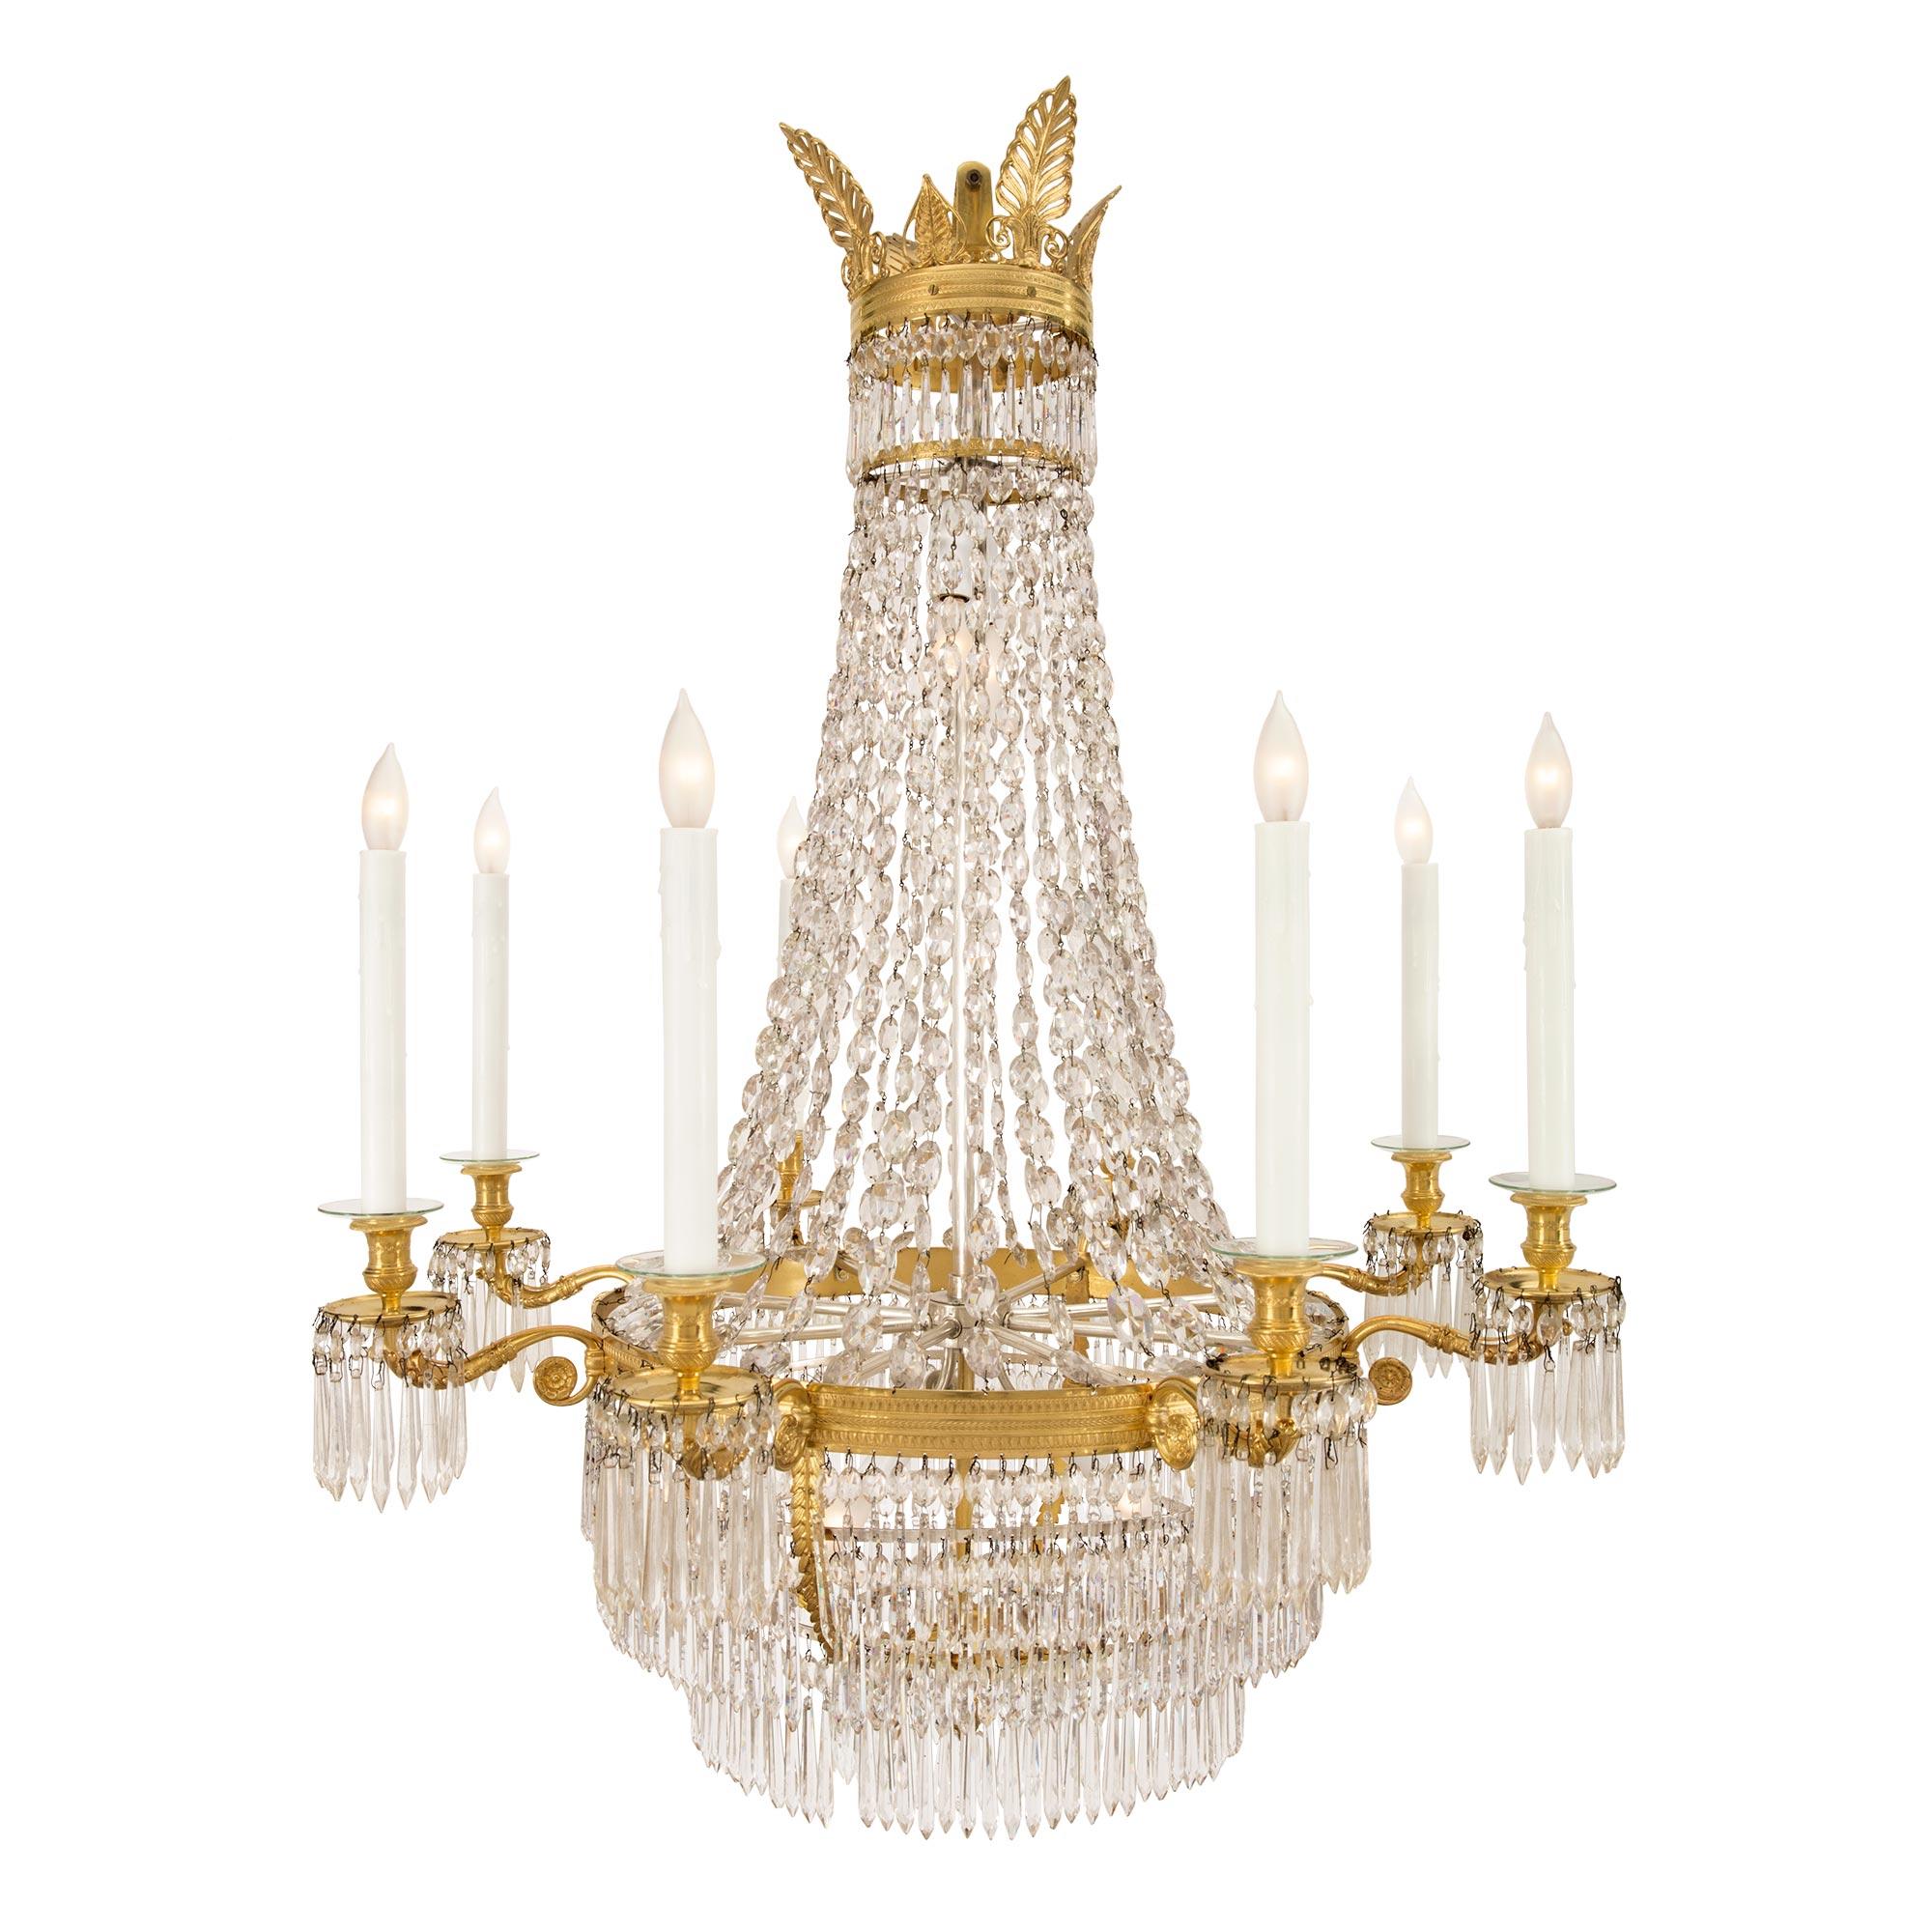 A most elegant French 19th century Neo-Classical st. ormolu and Baccarat crystal eight arm chandelier. The chandelier is centered by a striking acorn finial amidst fine overlapping foliate designs. Beautiful prism shaped cut crystal pendants spread